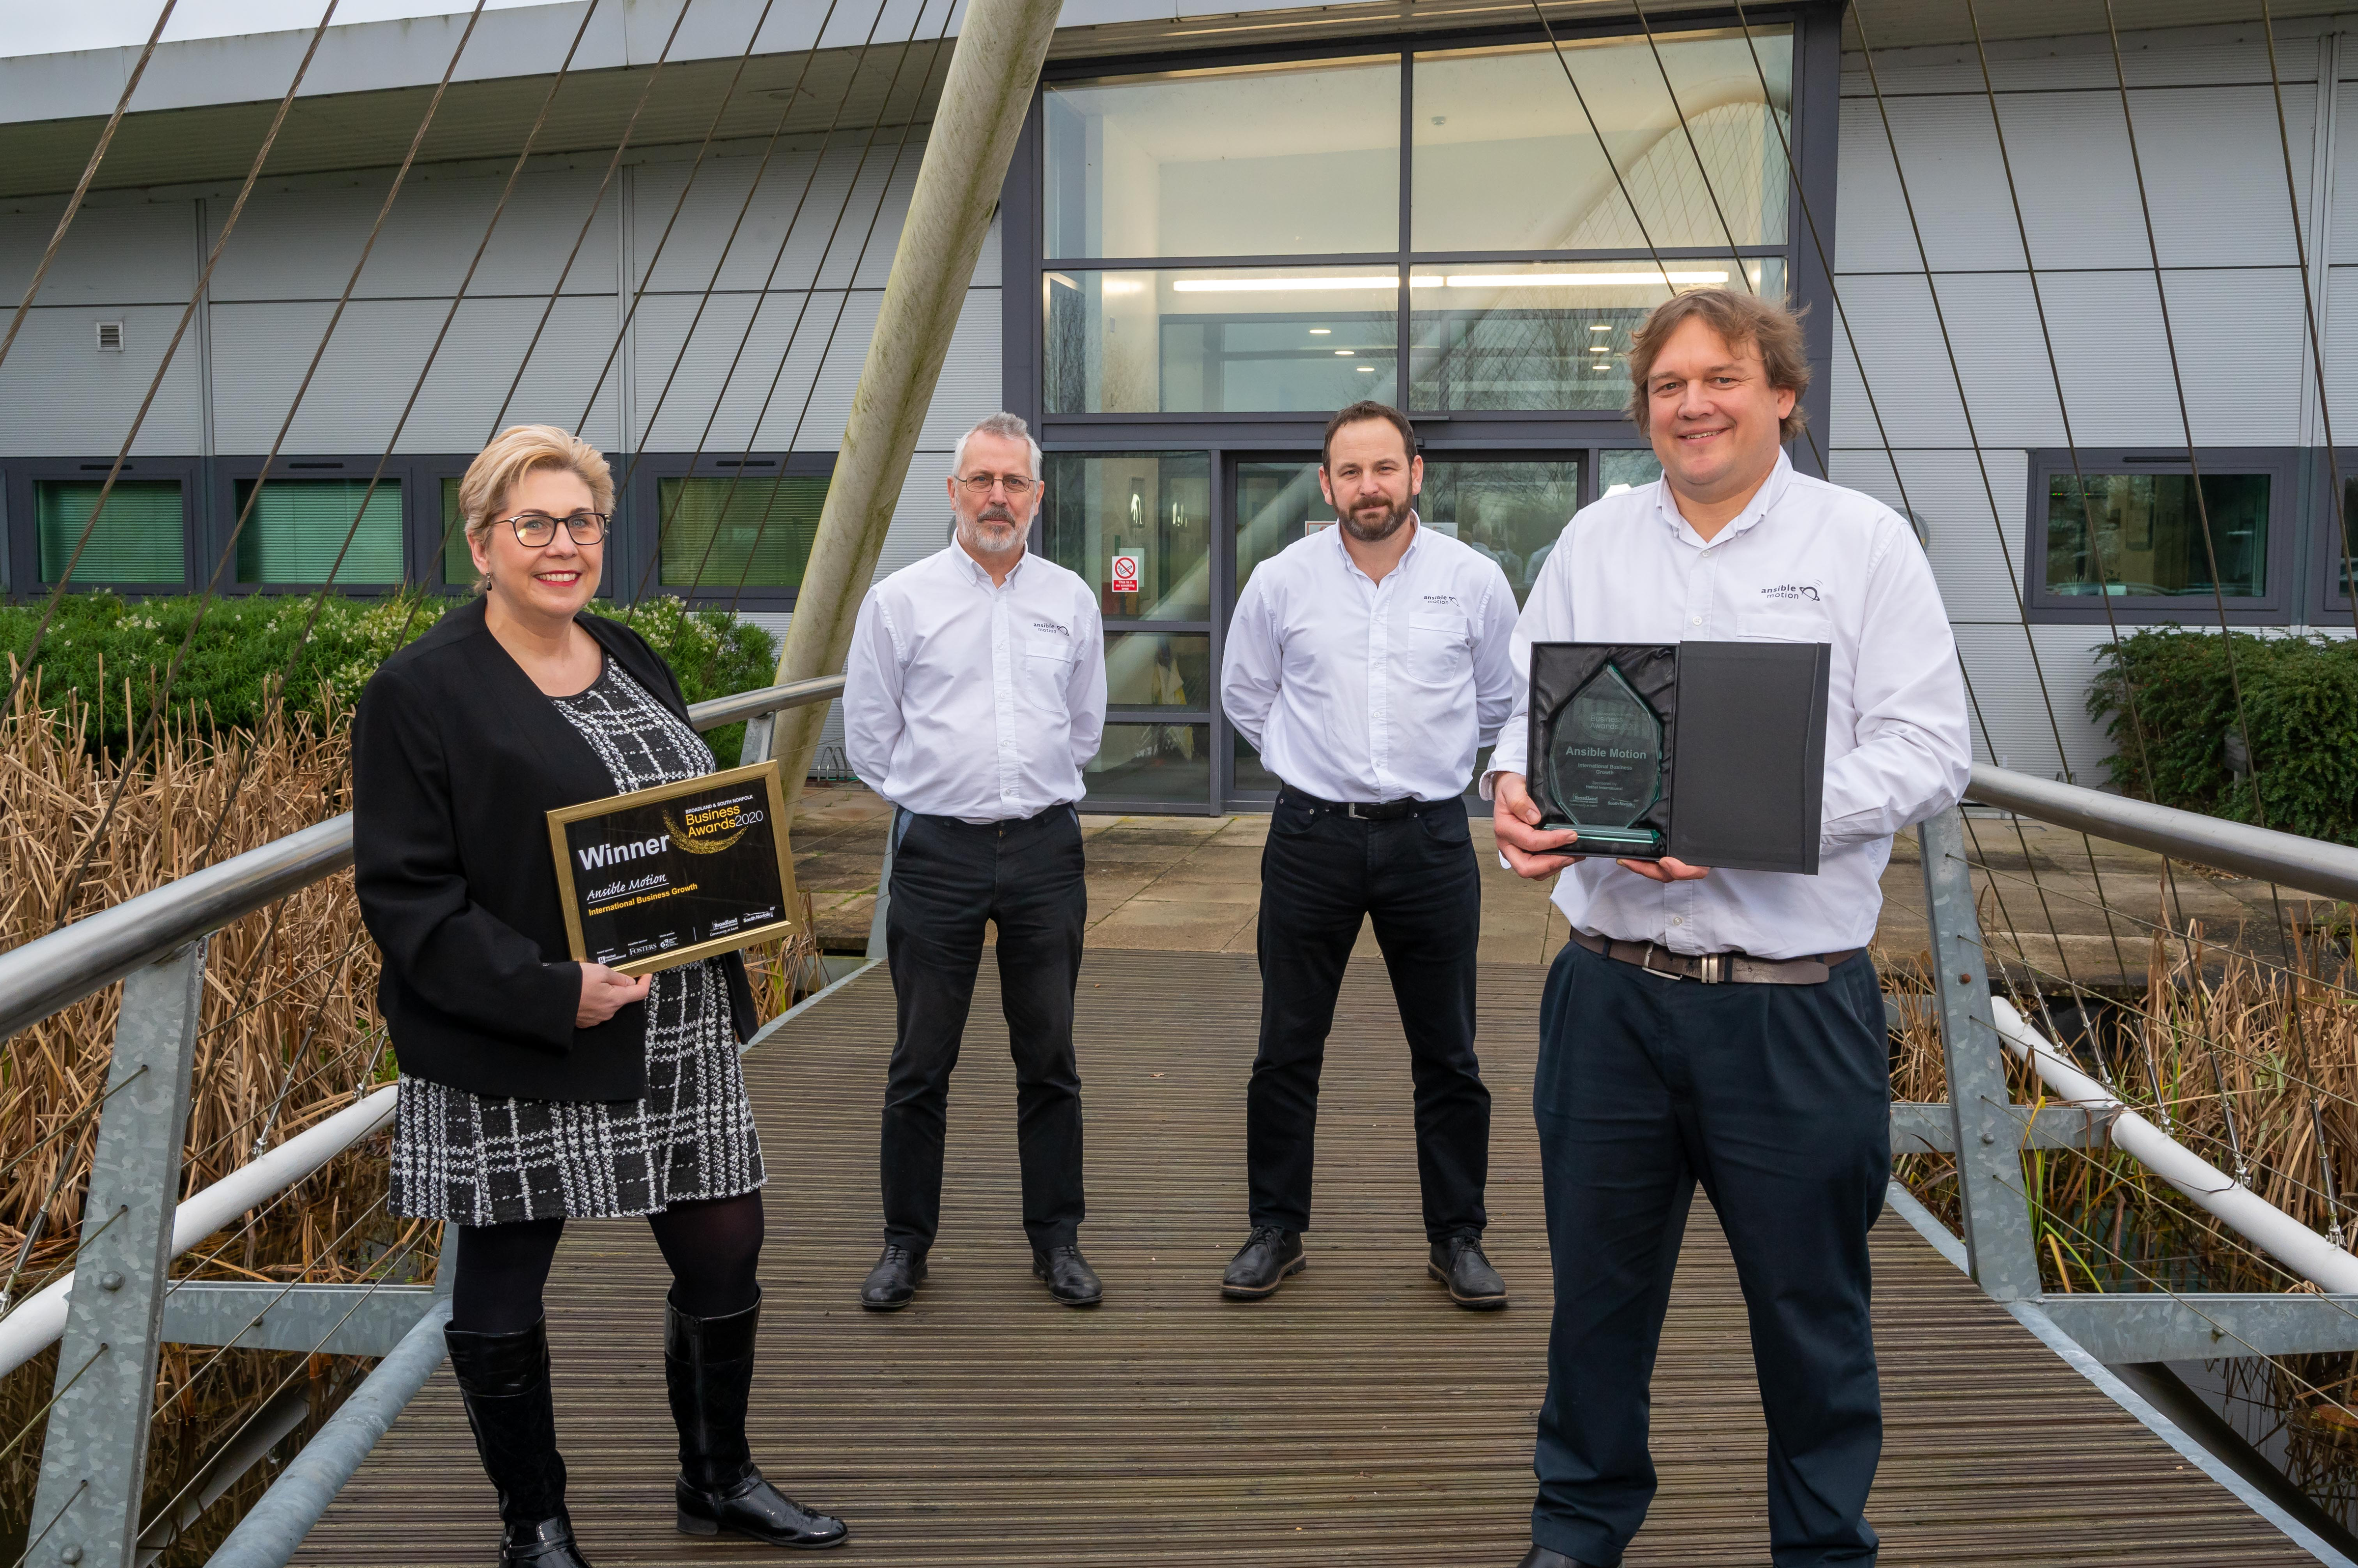 ansible-motion-picks-up-two-broadland-and-south-norfolk-business-awards